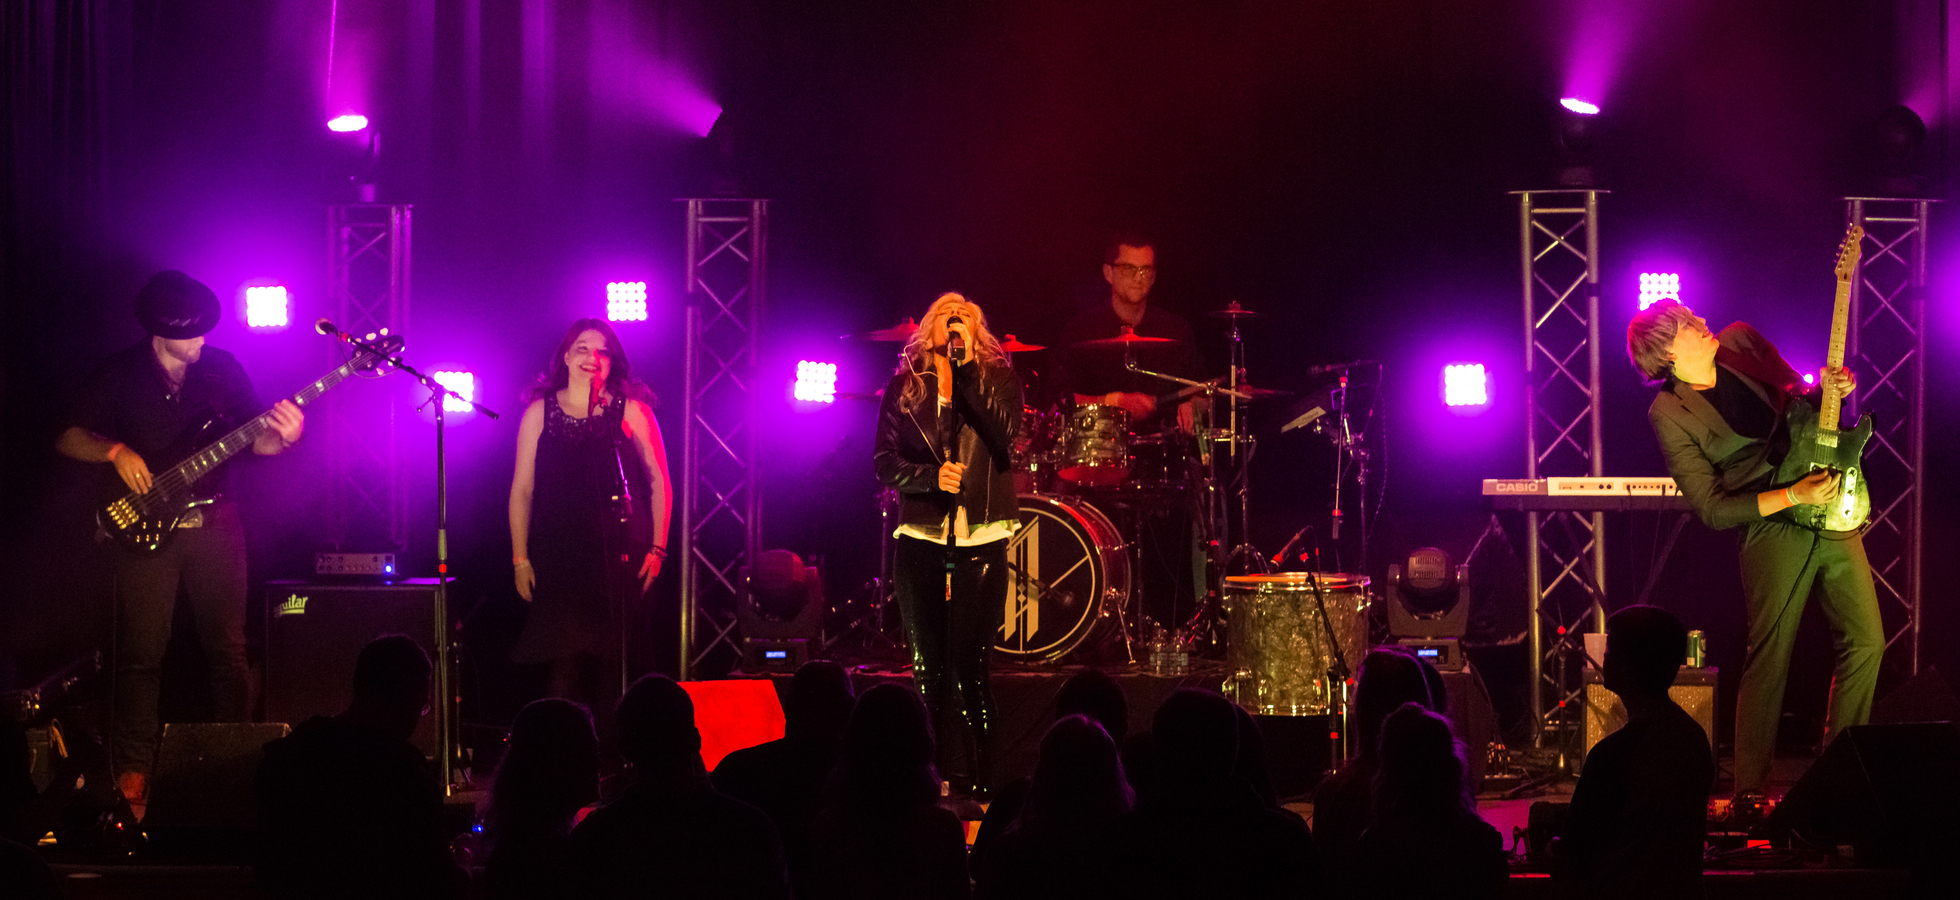 The band Adrienne O headlining the Gothic Theatre, 2015 (Adrienne started her music career at age 33)